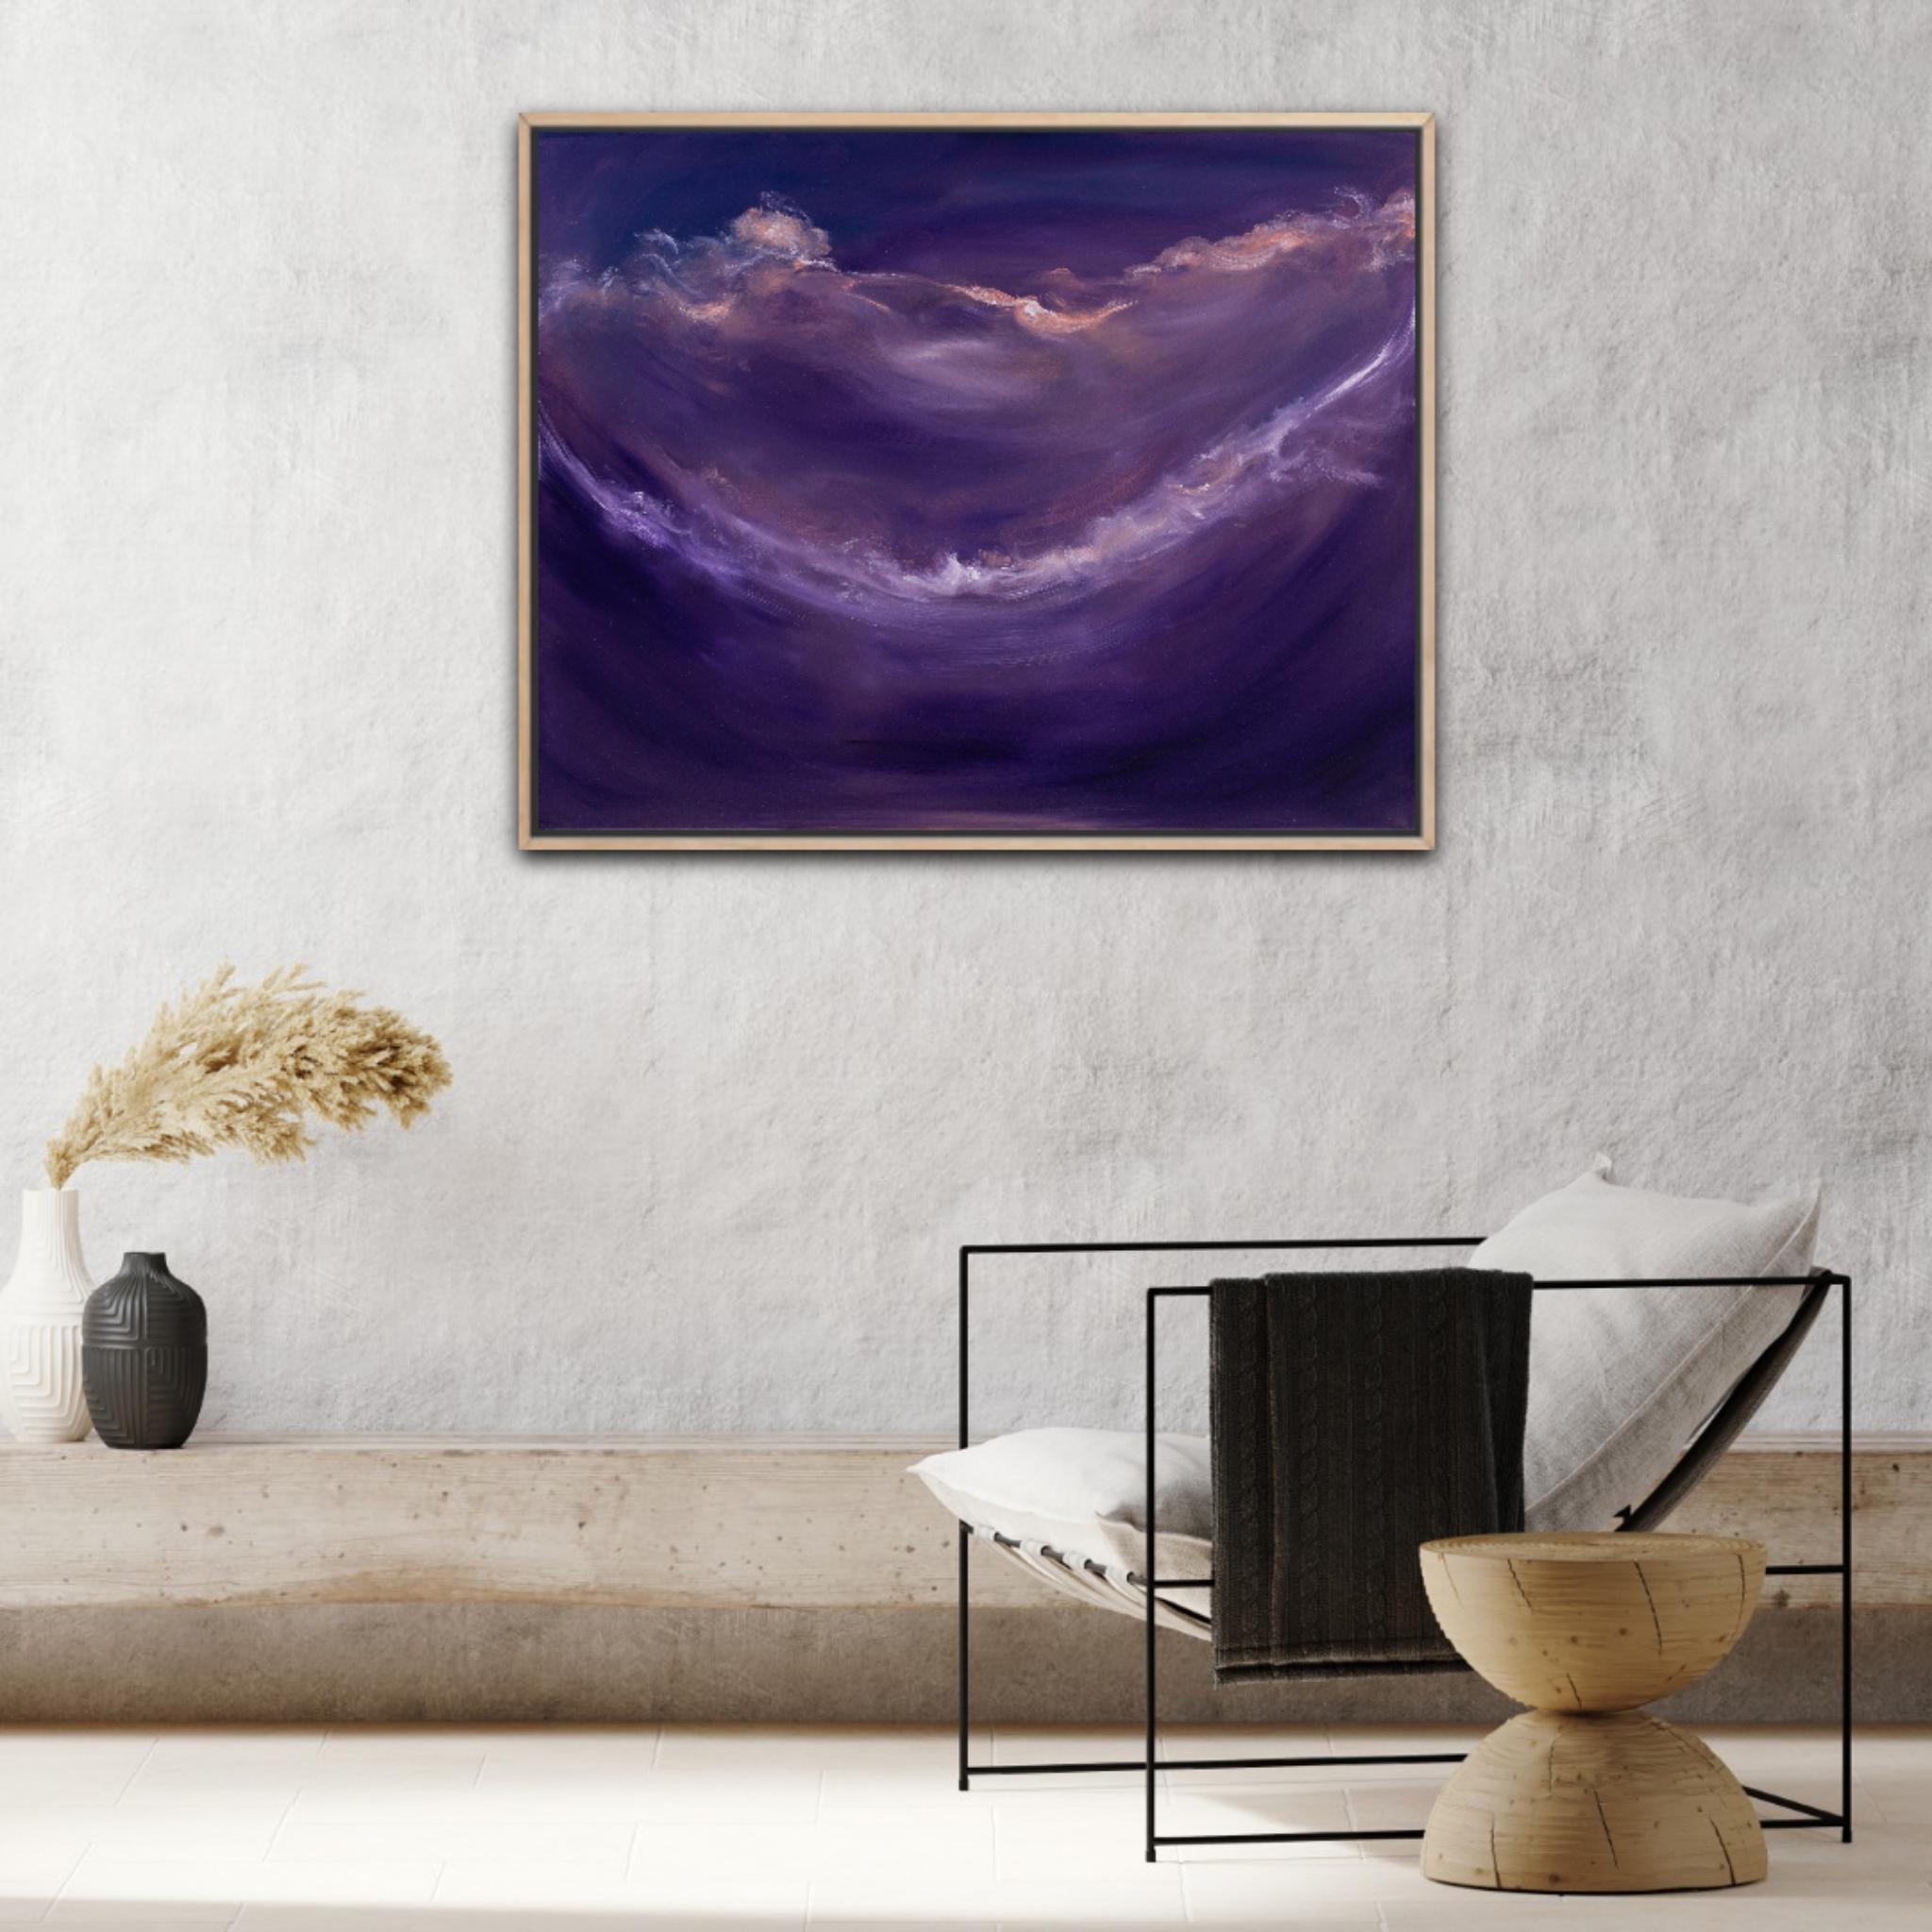 Deep space rhapsody - Abstract purple night sky painting For Sale 7